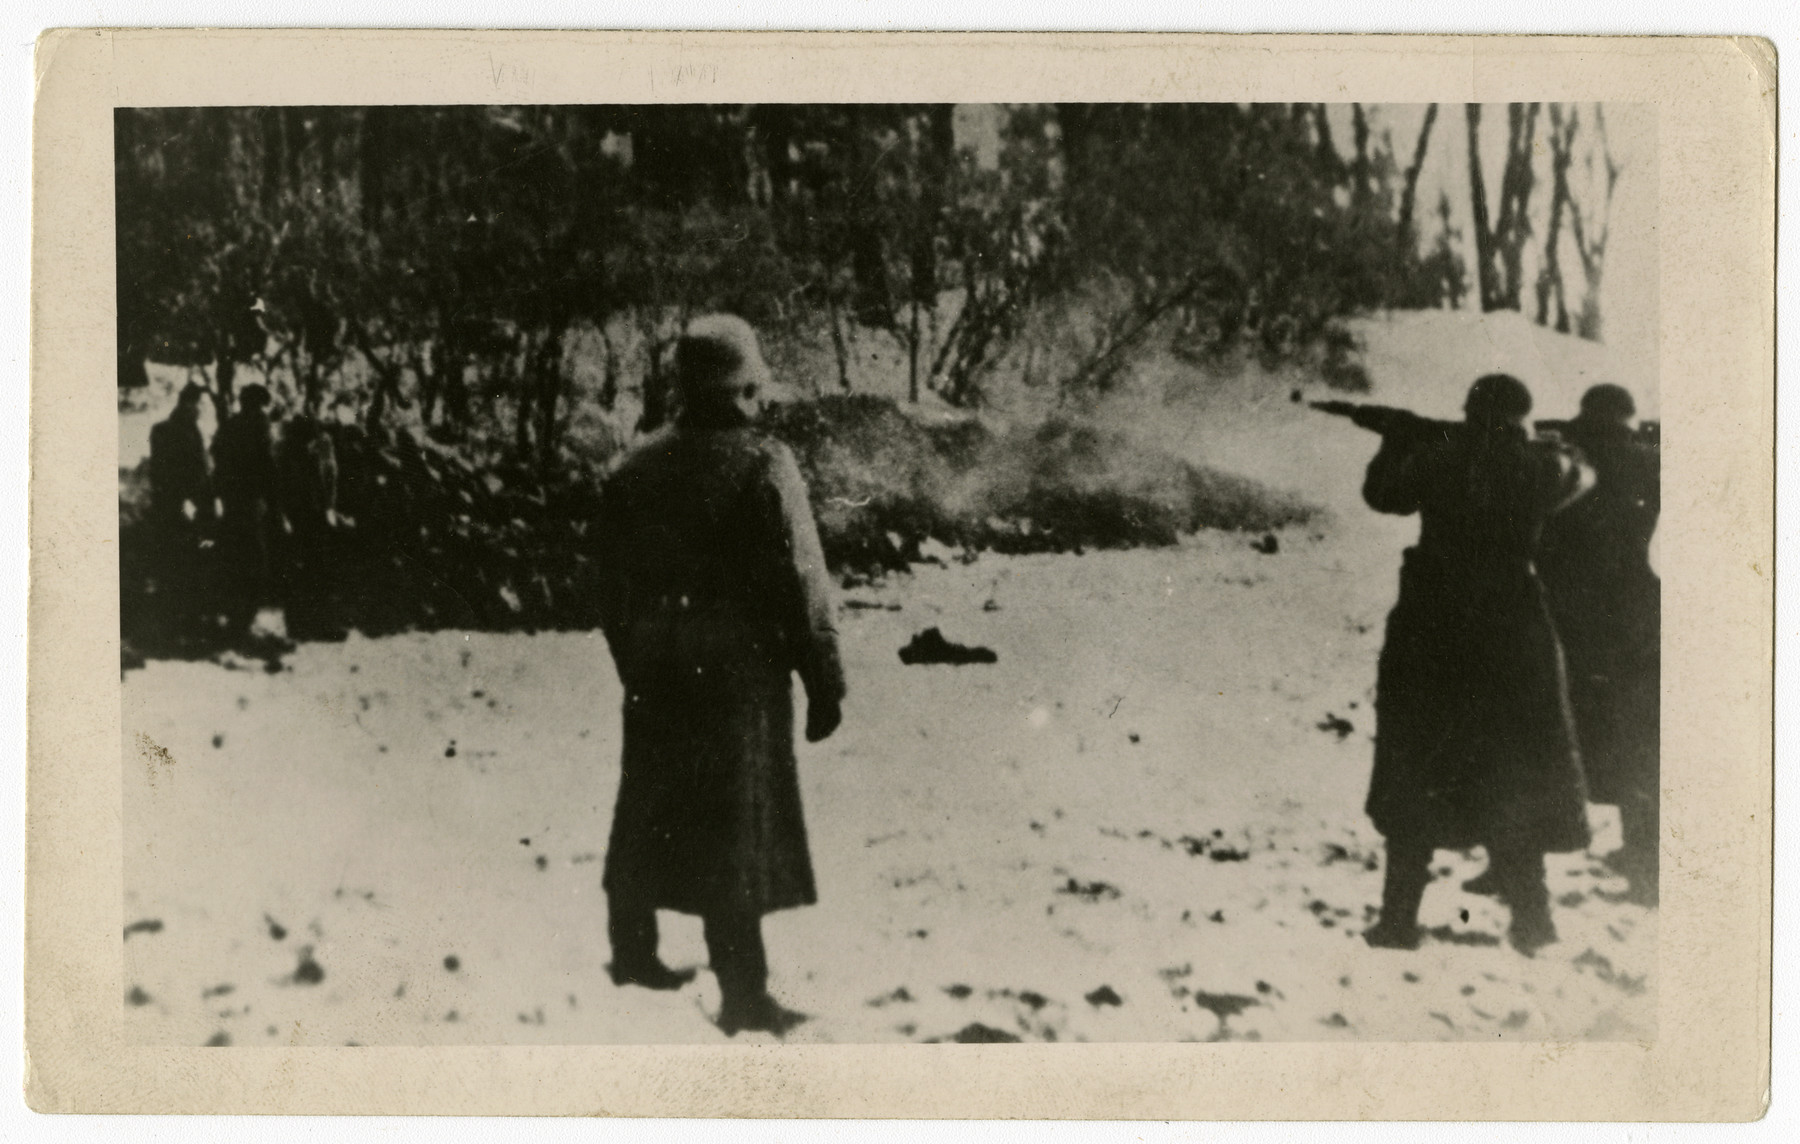 German police execute Poles at the edge of the Uzbornia Grove just outside of Bochnia. 

The original caption in Polish reads:

"From a series of Nazi crimes during the occupation of Poland

The forest near Bochnia
Execution in the forest...

Published by the Jewish Historical Commission of Katowice"

This widely circulated copy print (see WS# 73831) is one found by Jacob Igra in an apartment in Sosnowiec after the war. Many of the photographs are believed to have been taken by a soldier with the SD-SIPO (Sicherheitspolizei) following the invasion of Poland in 1939. Additional photographs depict einsatzgruppen activities at sites throughout Nazi occupied Eastern Europe and are likely later additions to the album.